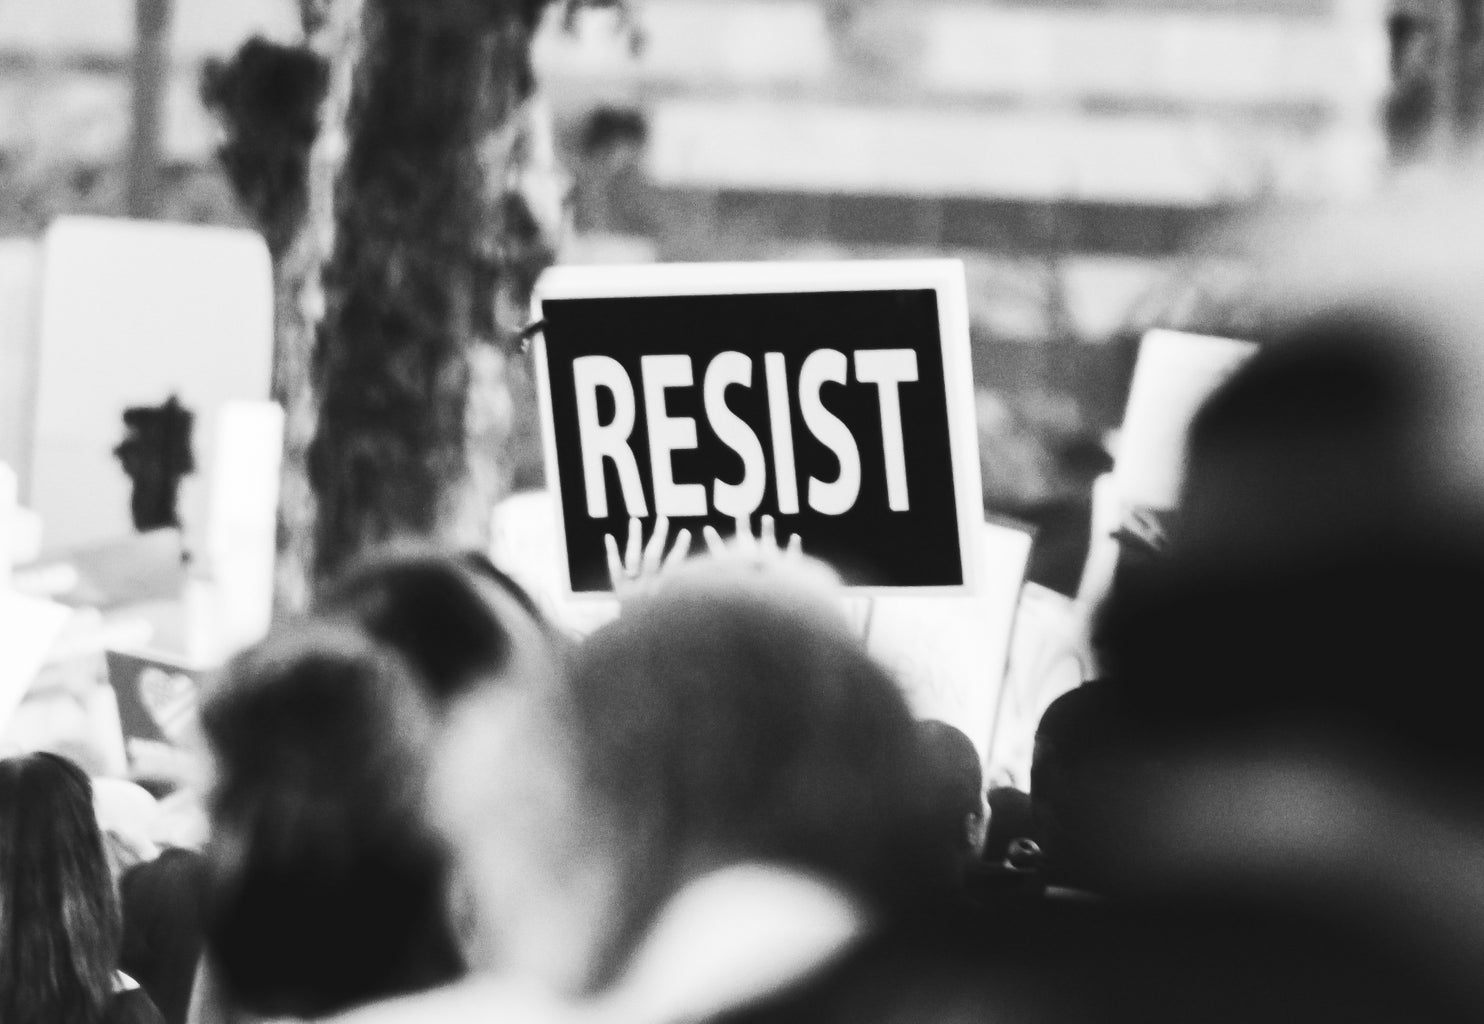 Resist protest sign